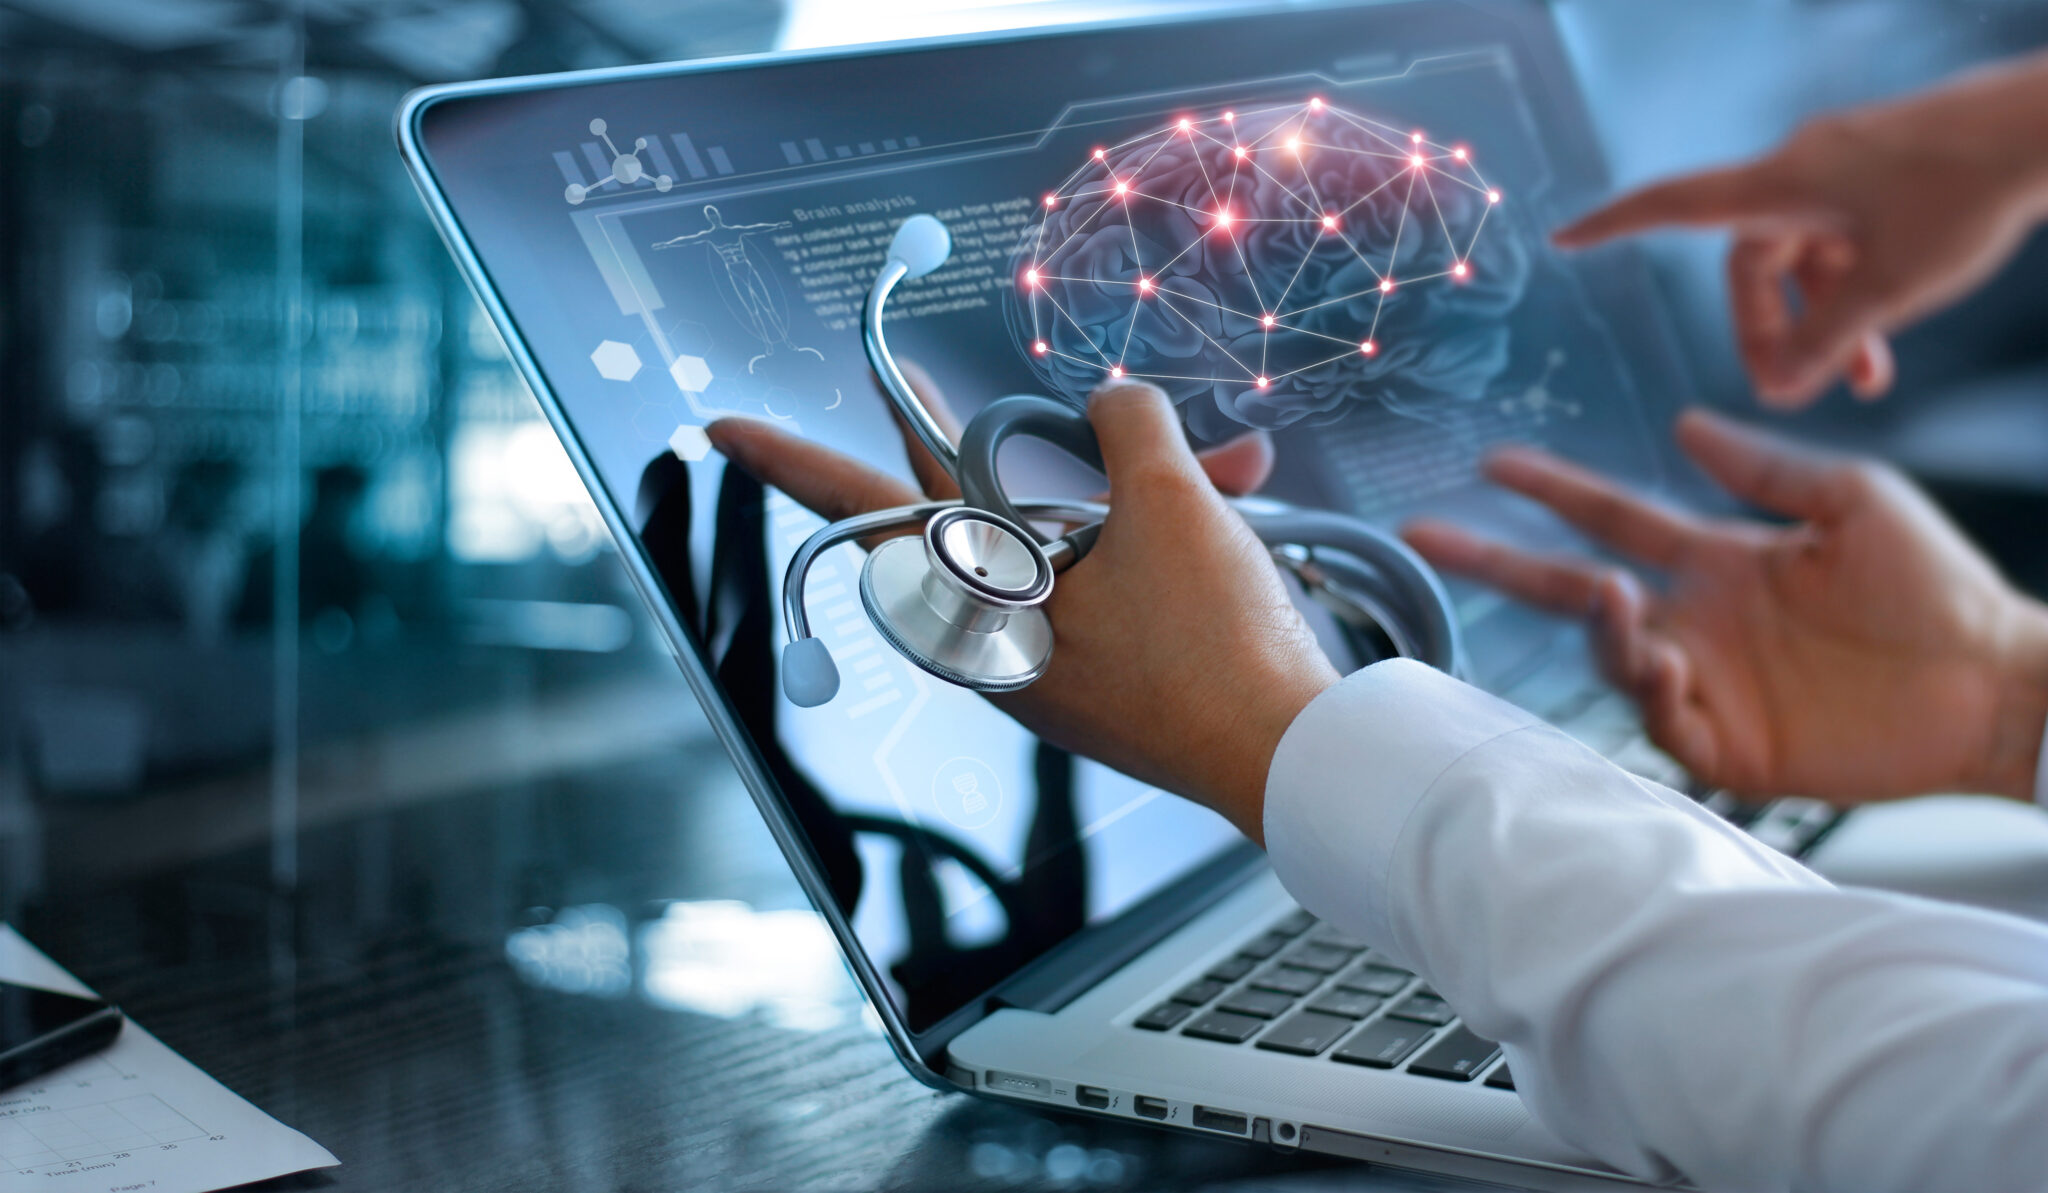 Are you ready for the future digital transformation in healthcare?